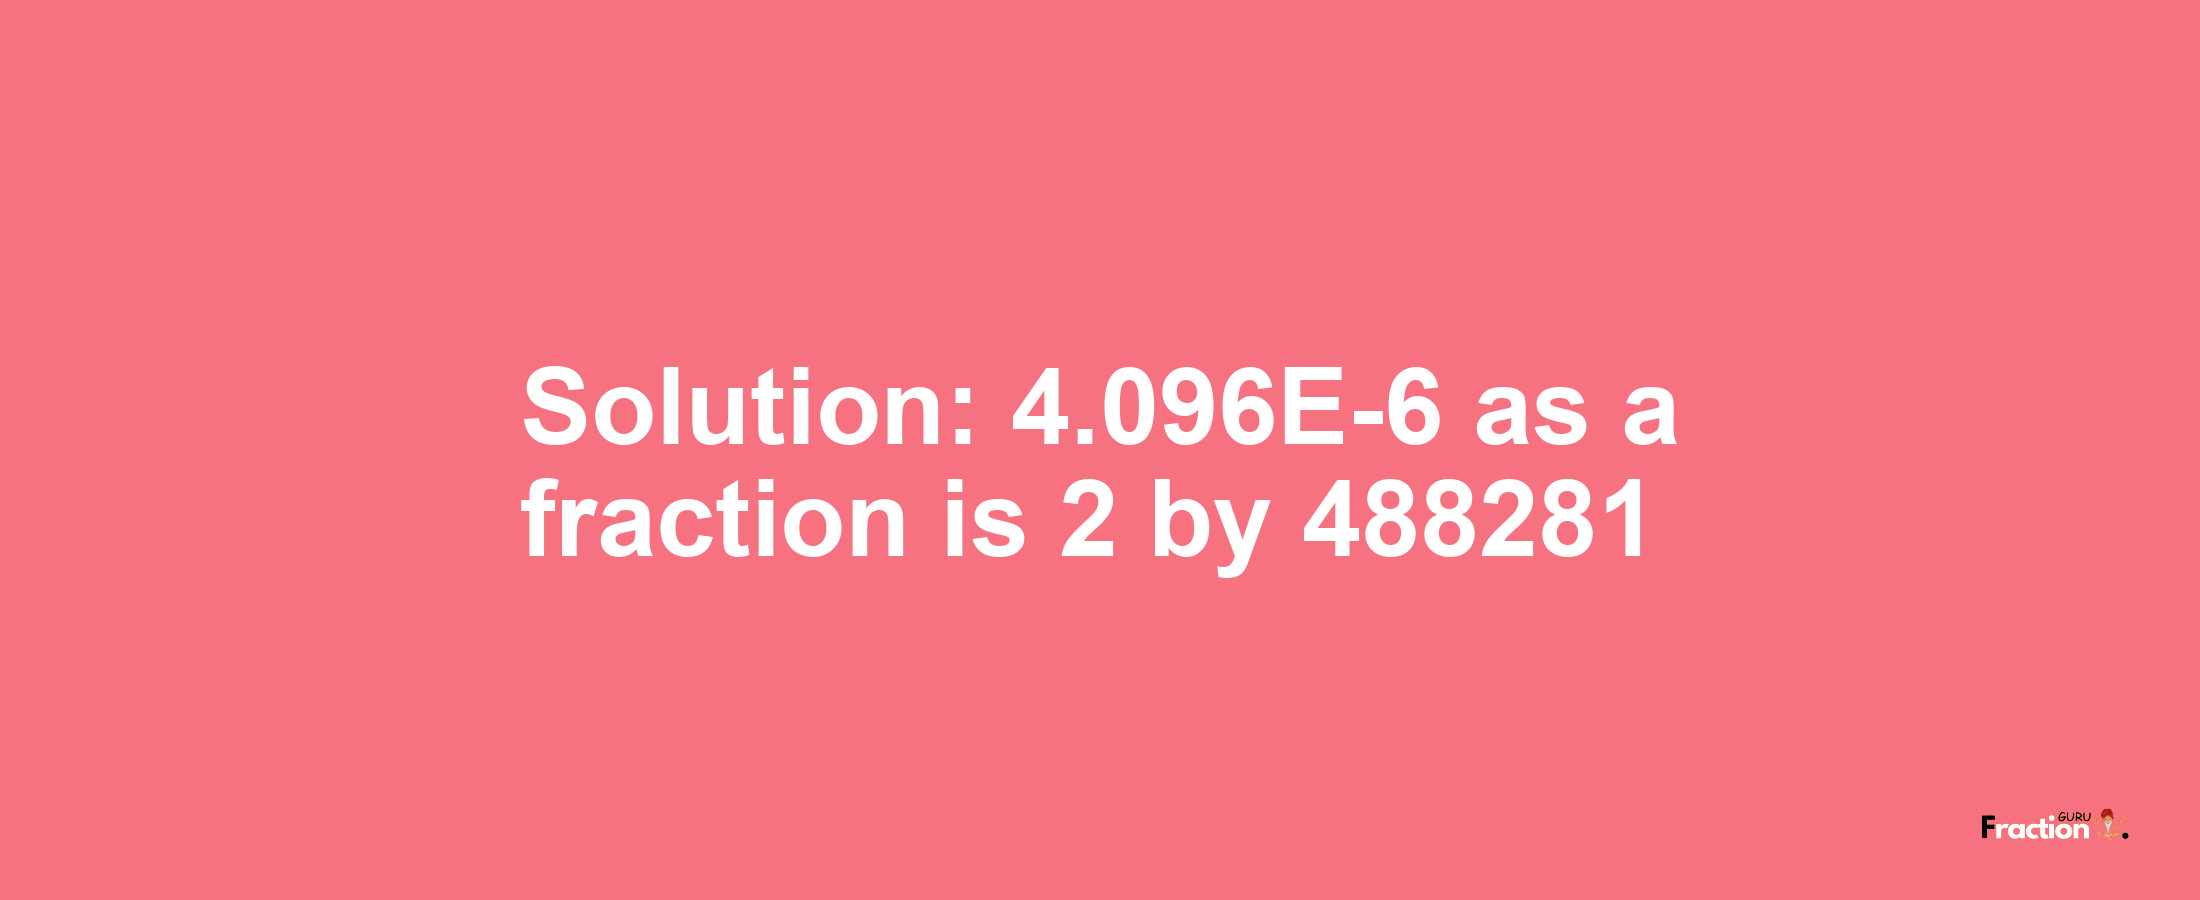 Solution:4.096E-6 as a fraction is 2/488281